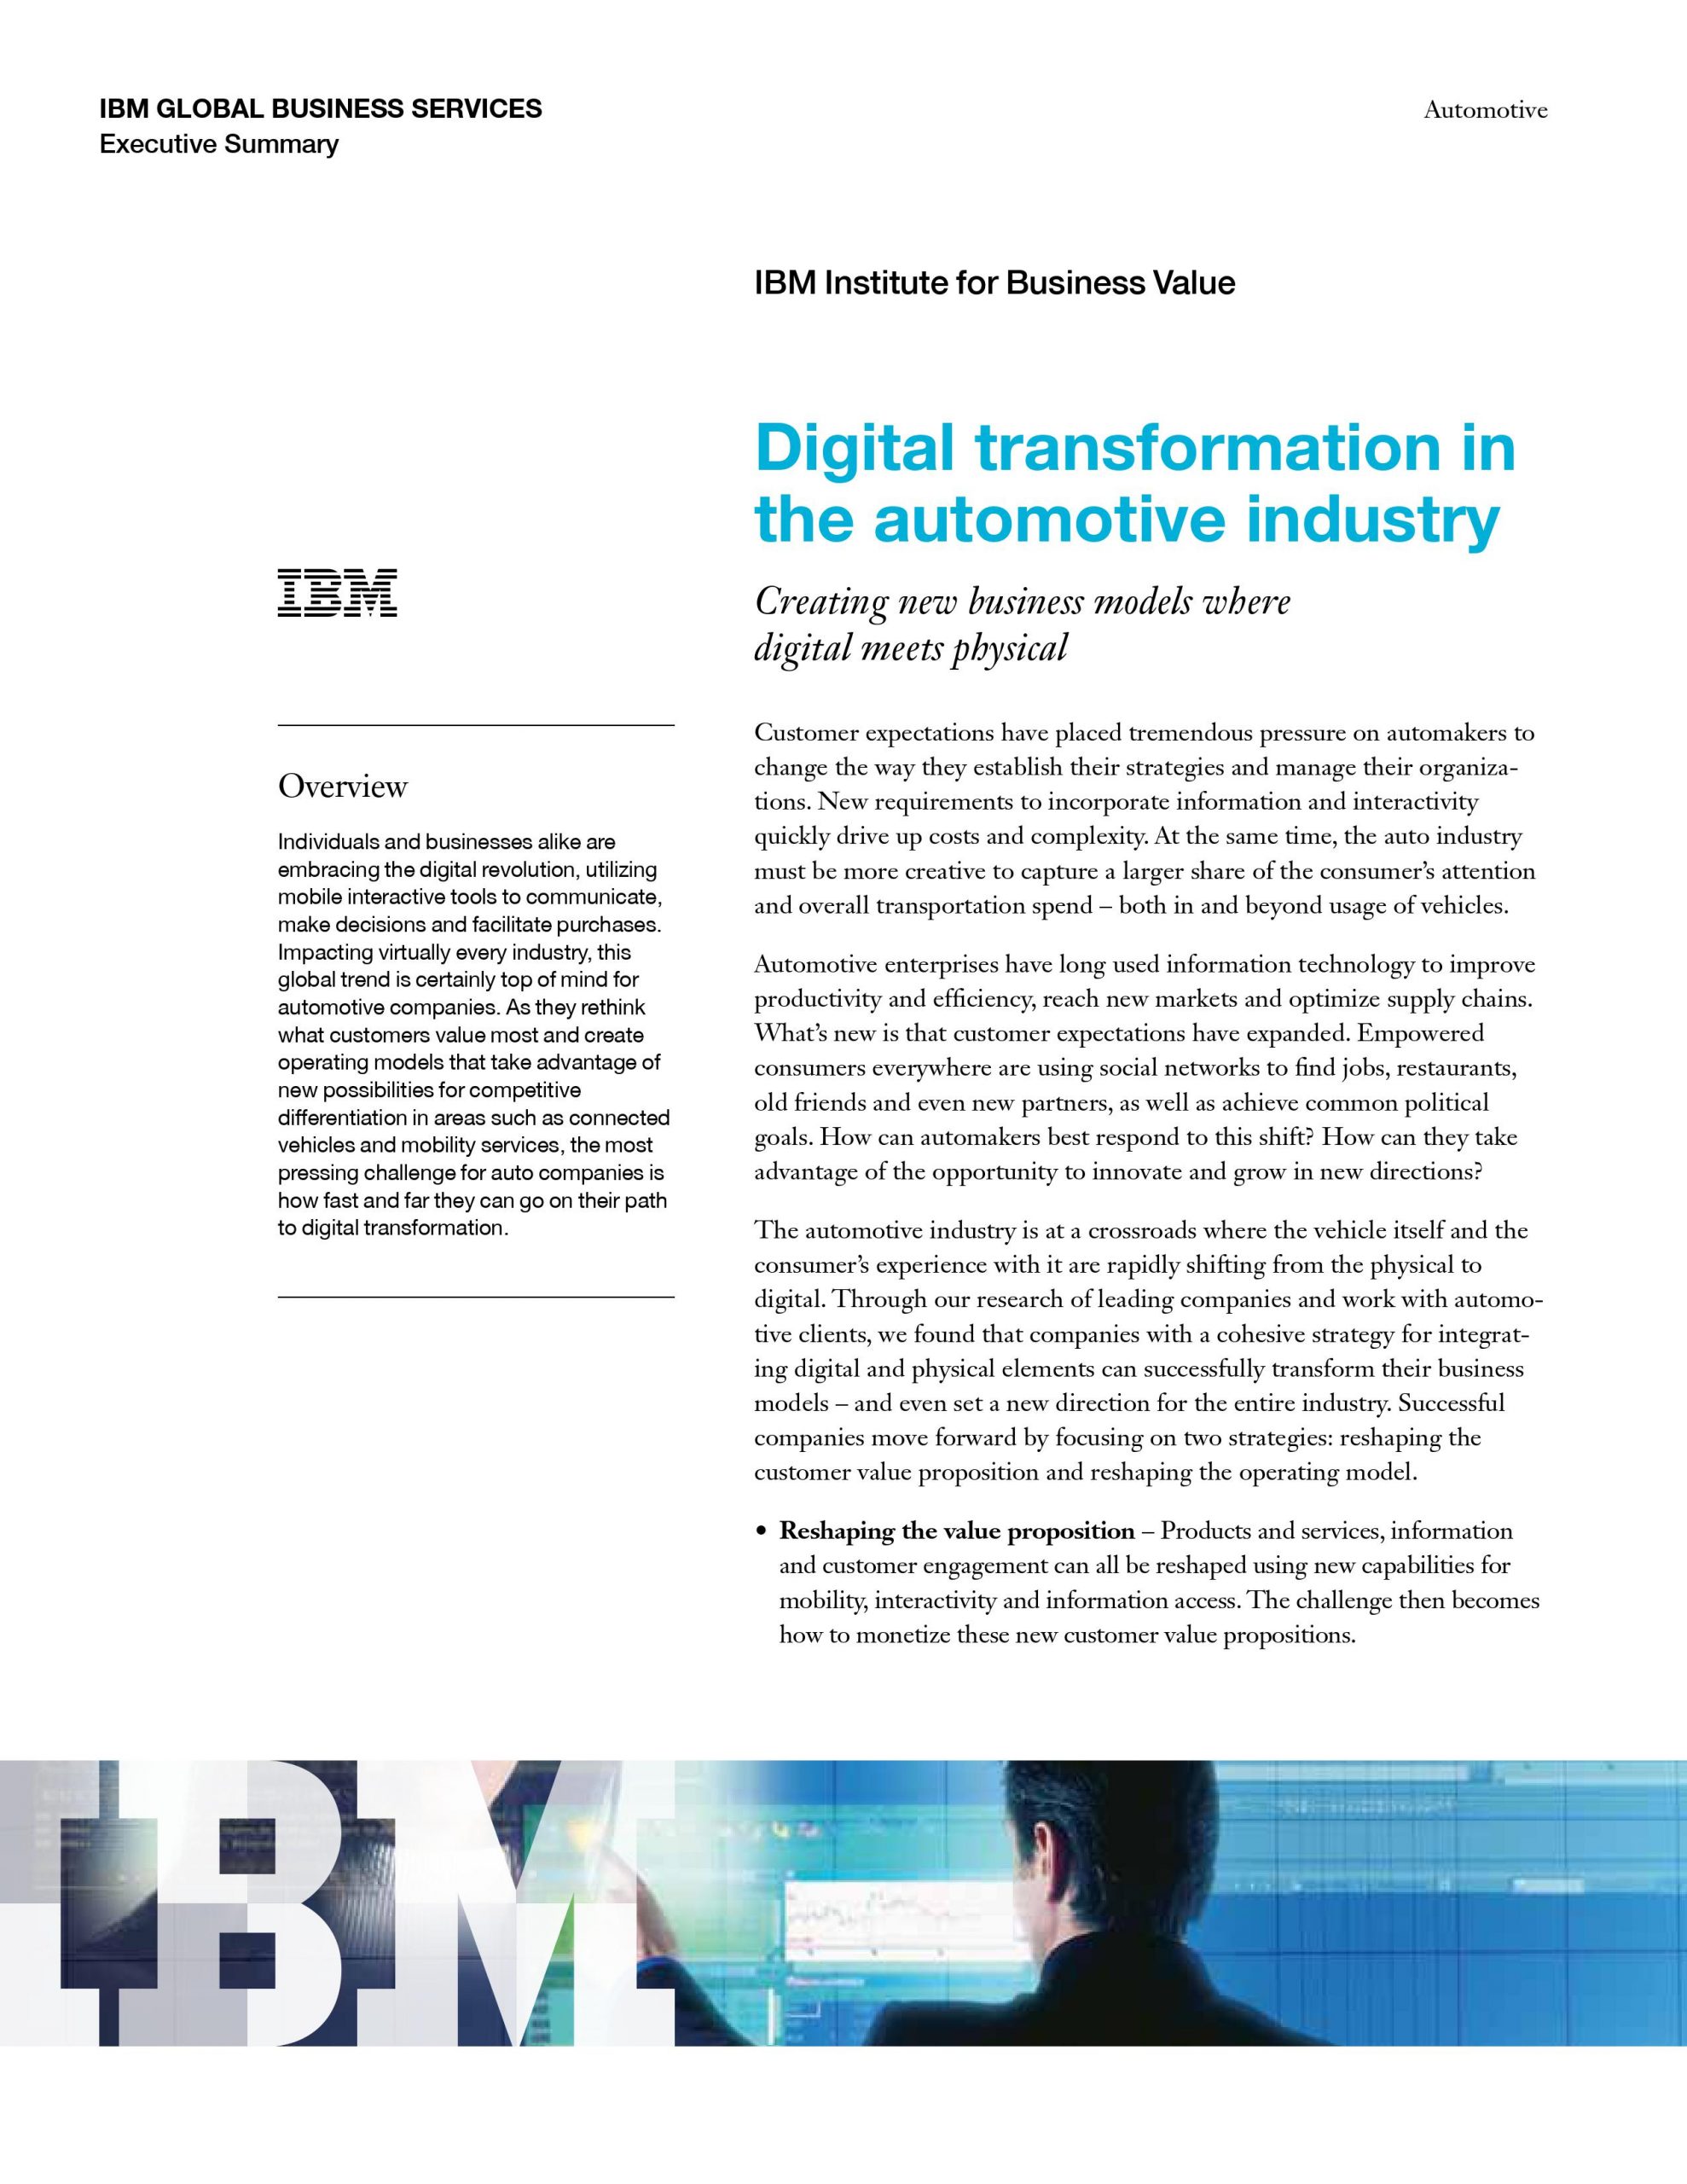 Digital transformation in the automotive industry